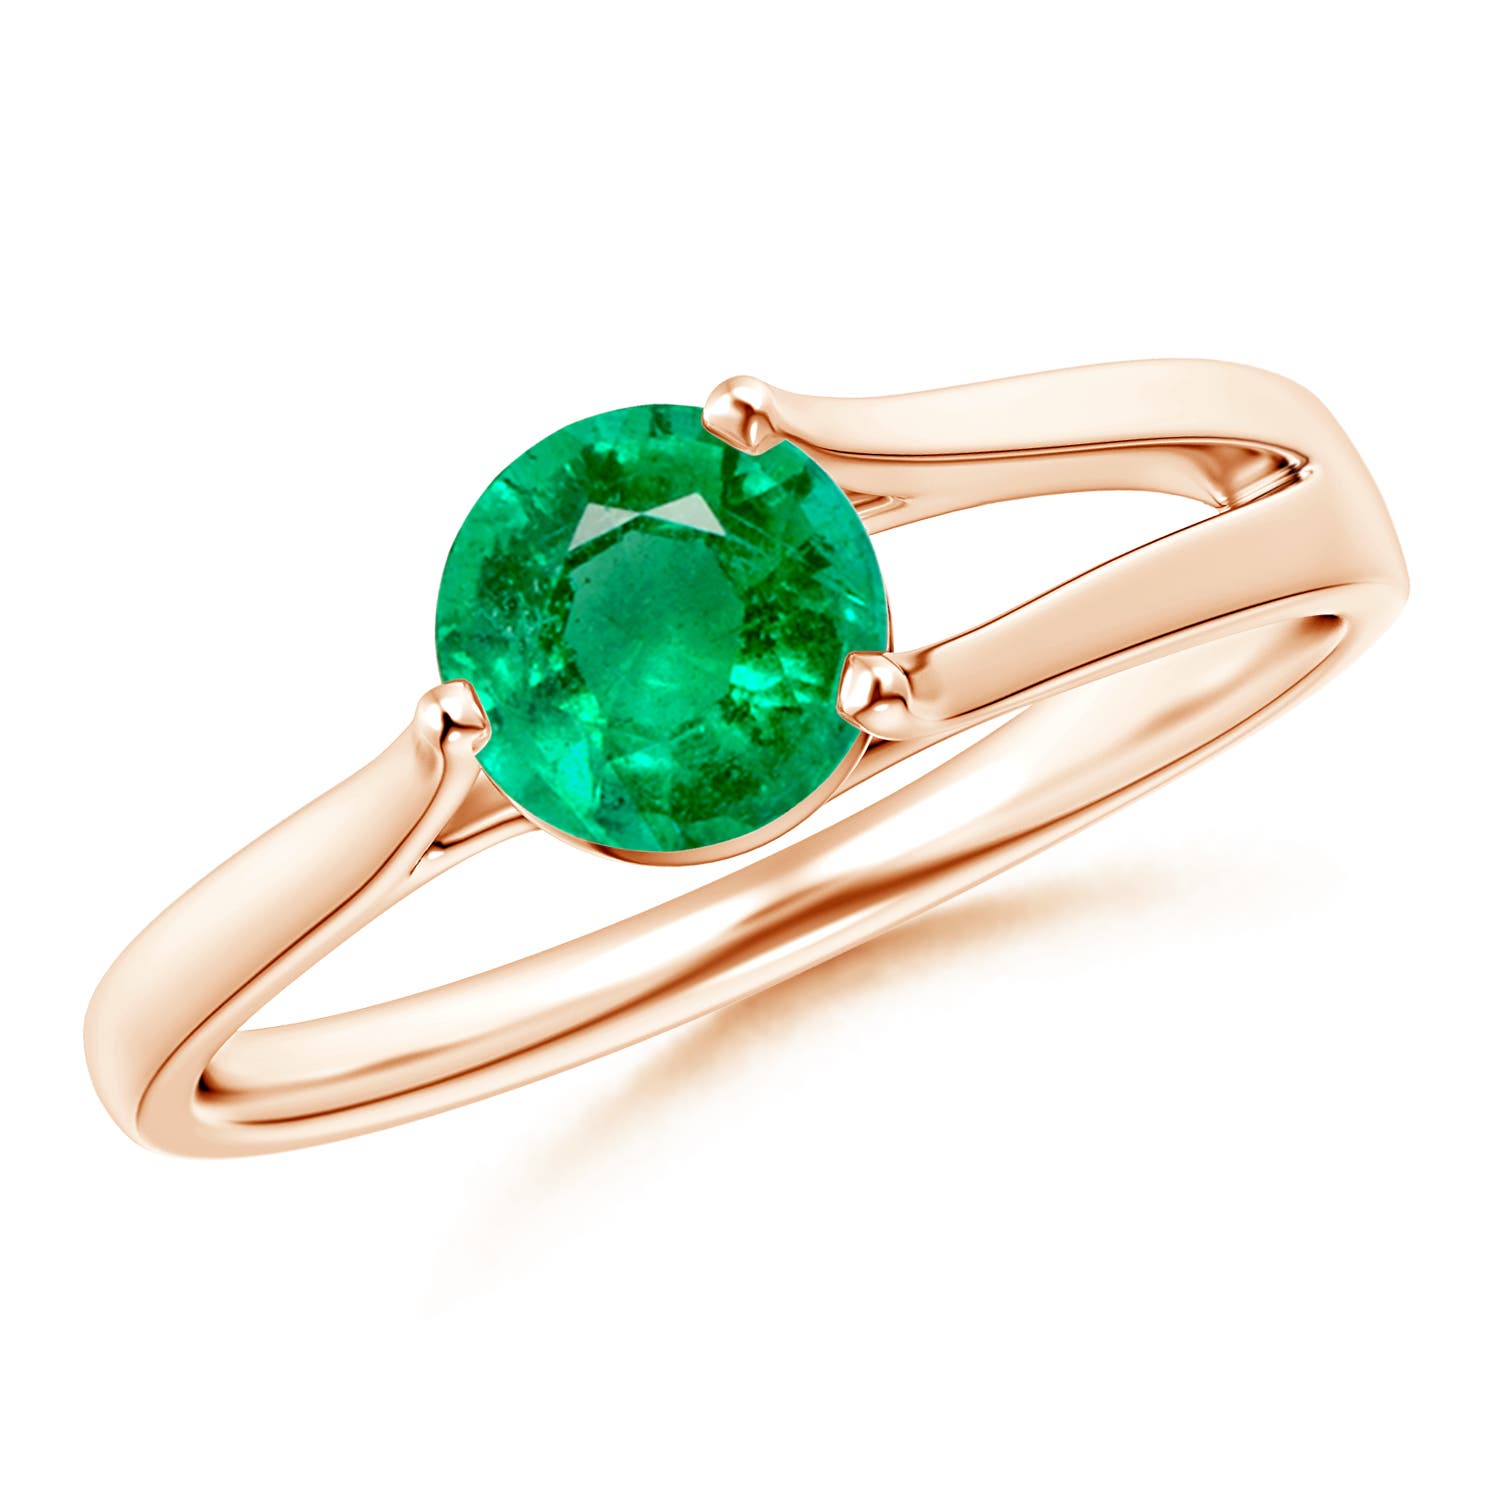 AAA - Emerald / 0.75 CT / 14 KT Rose Gold